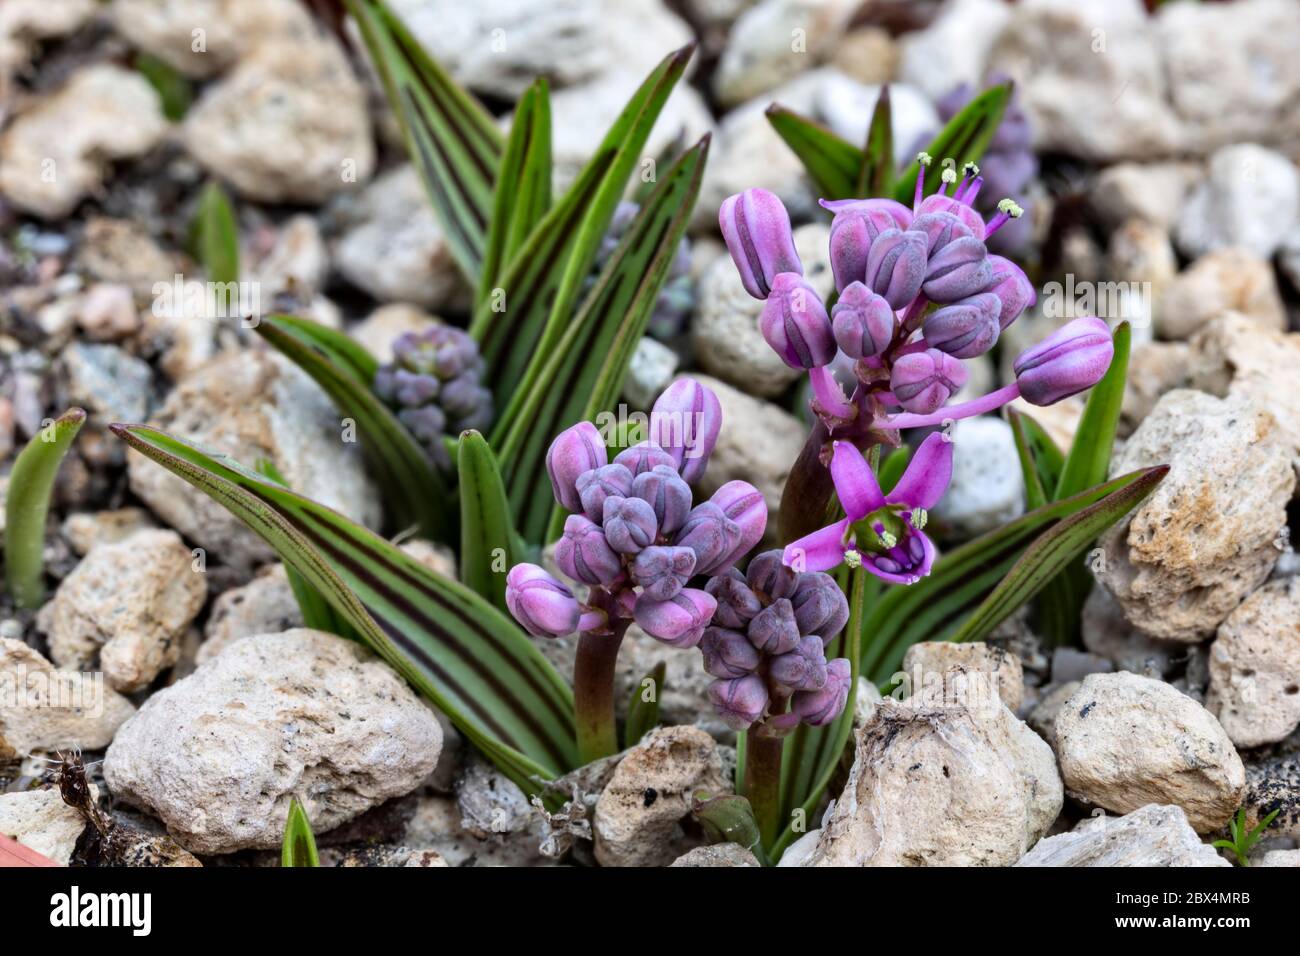 Ledebouria cooperi, a small bulbous plant from South Africa. Family: Hyacinthaceae Stock Photo